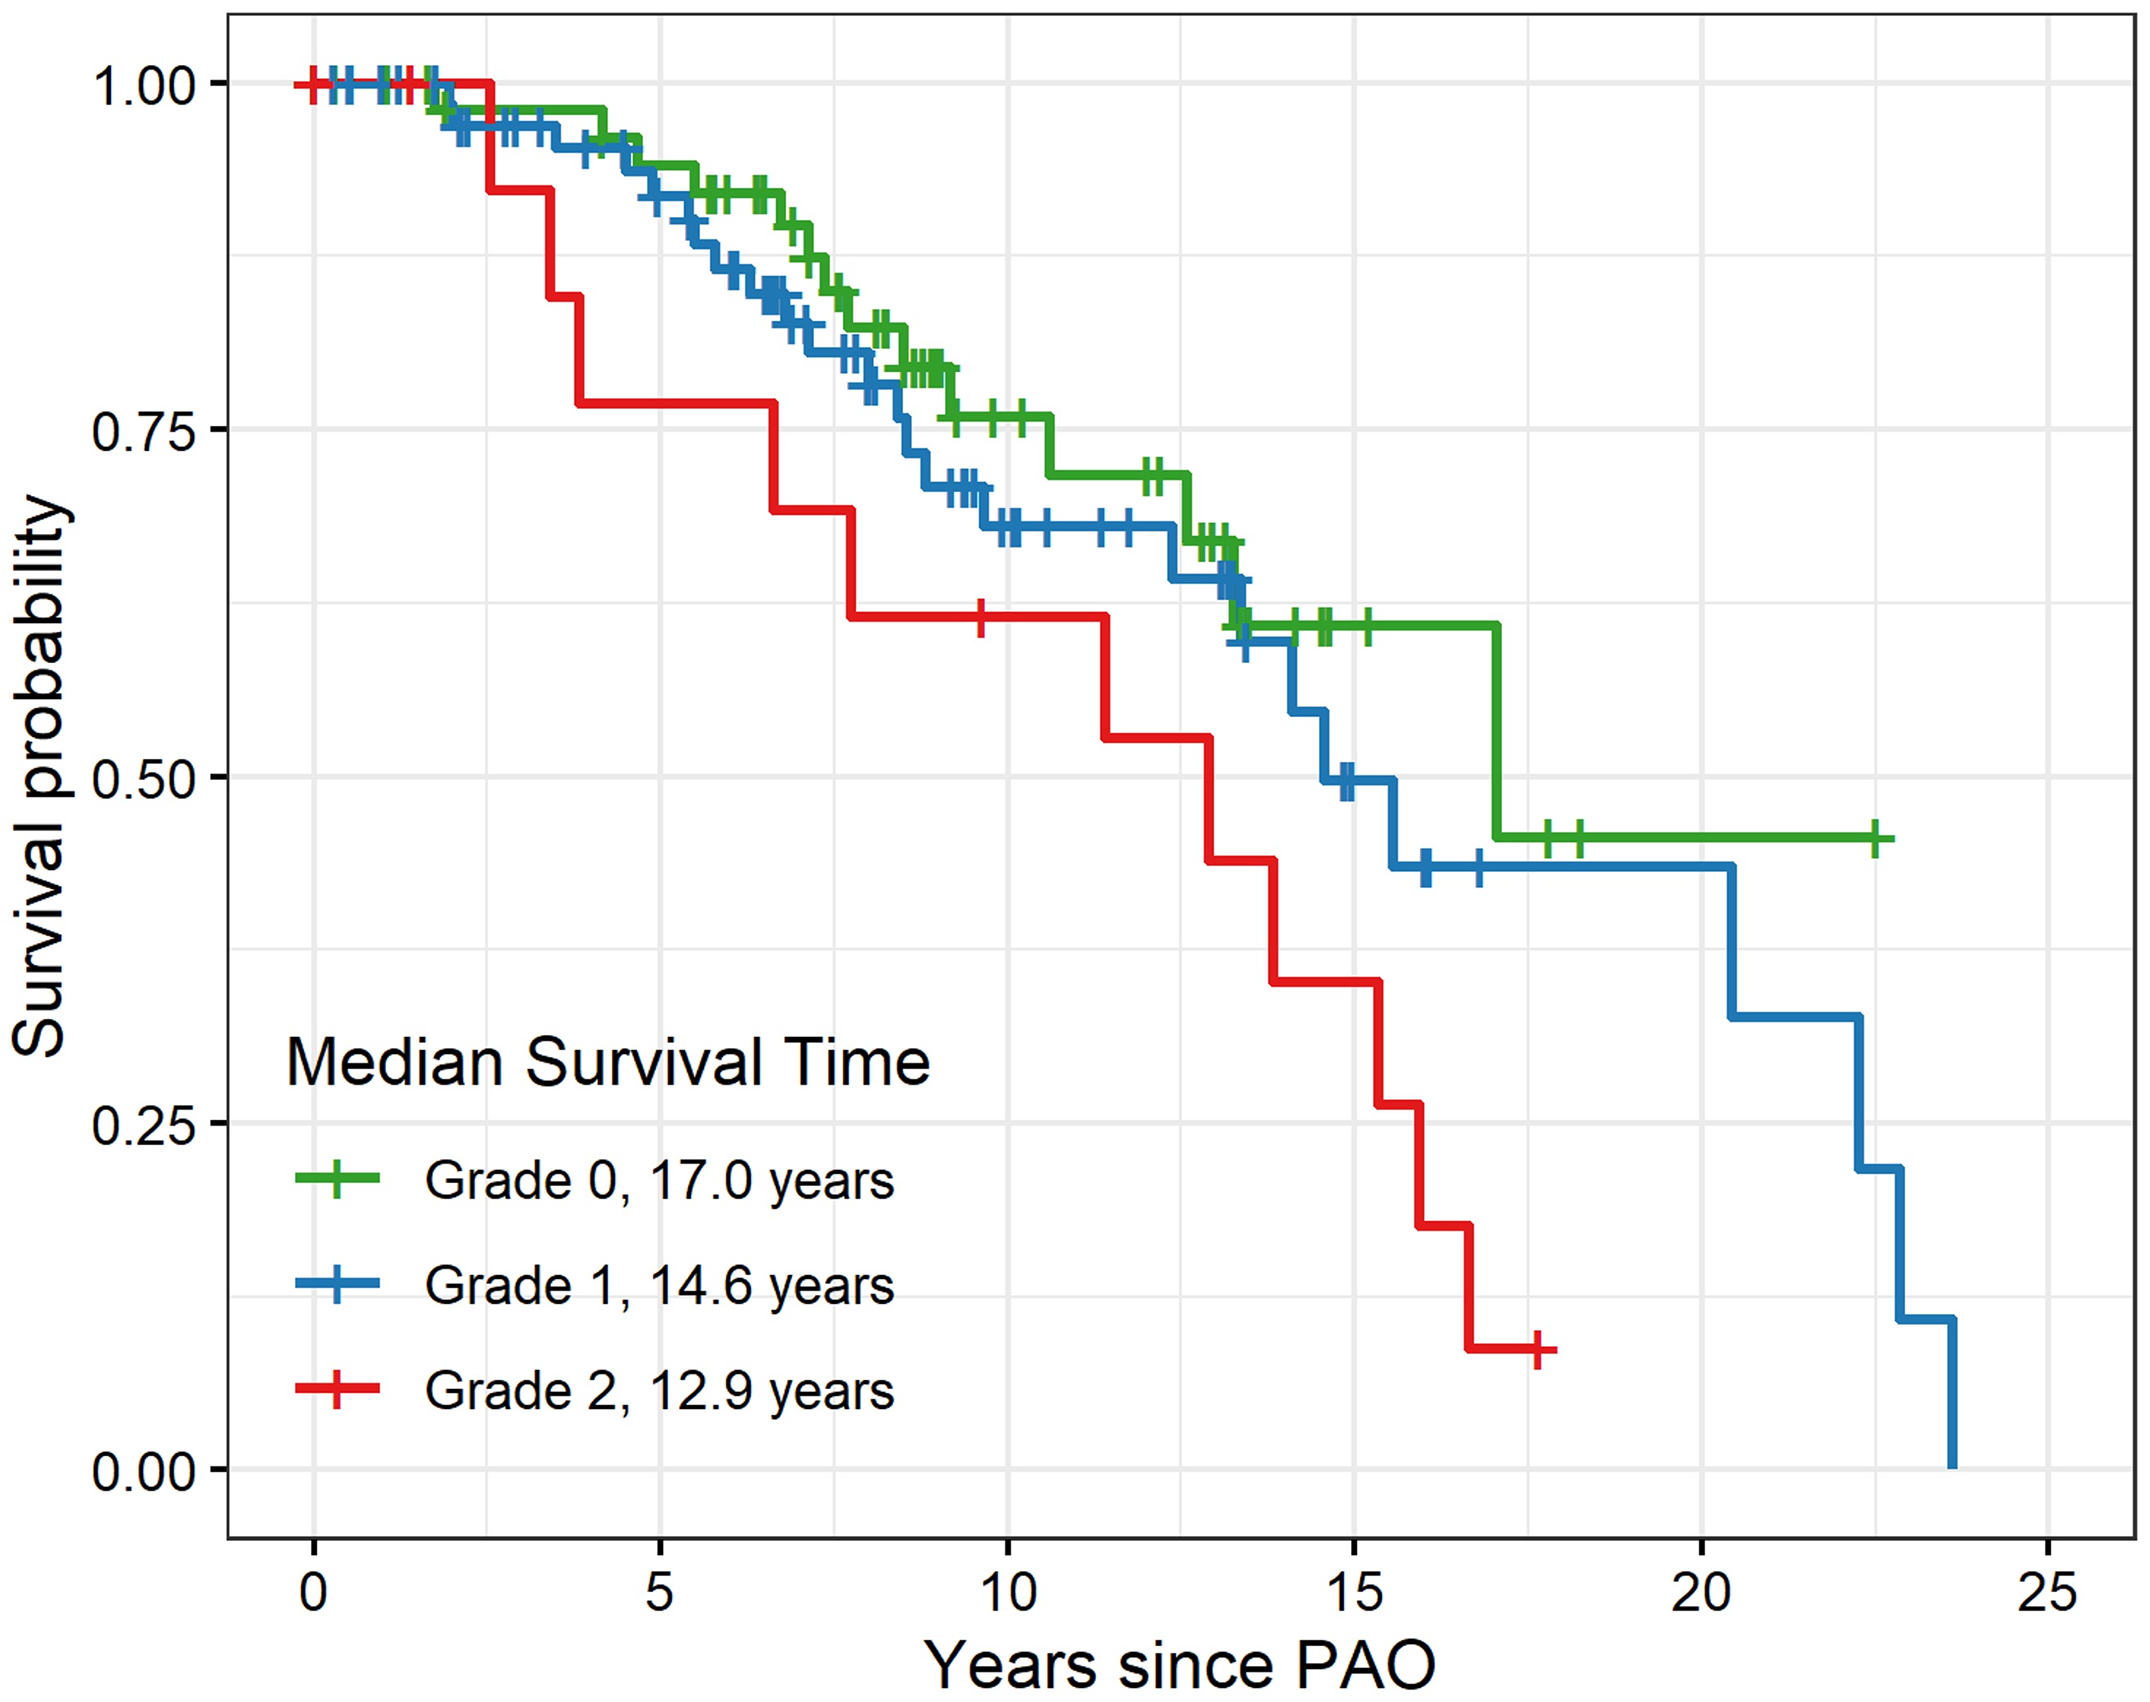 Kaplan-Meier survival analysis by Tönnis grade of osteoarthritis for patients ≥40 years of age at the time of PAO.